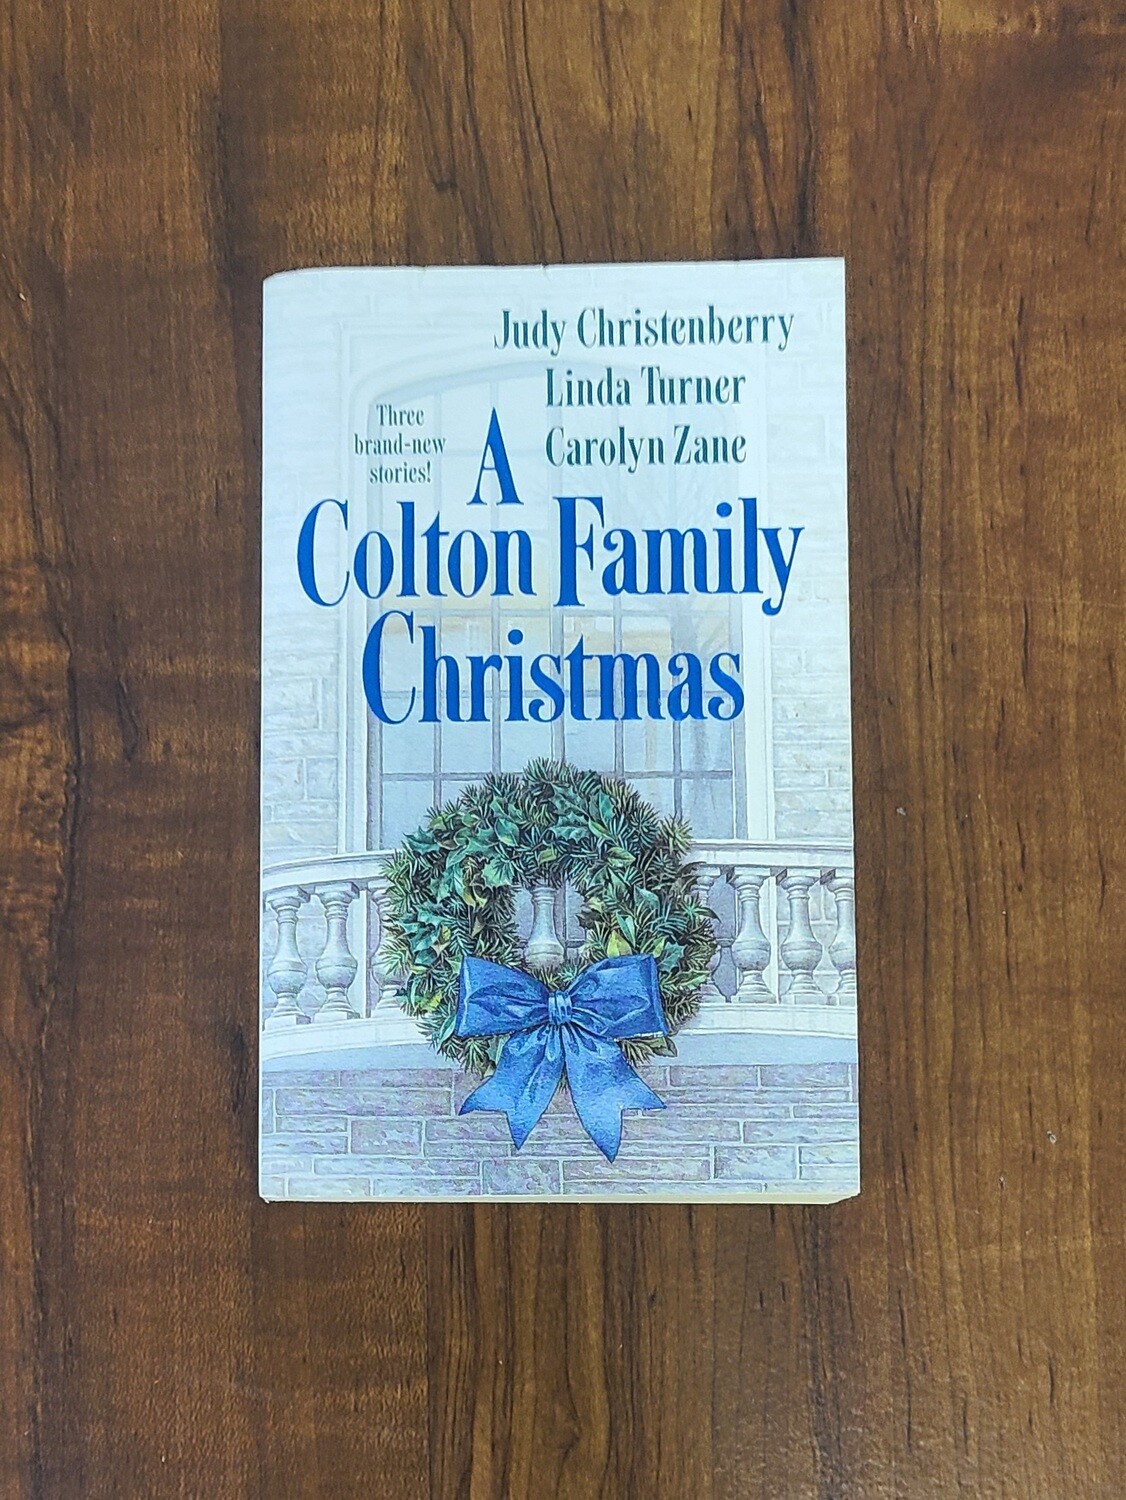 A Colton Family Christmas by Judy Christenberry, Linda Turner, and Carolyn Zane